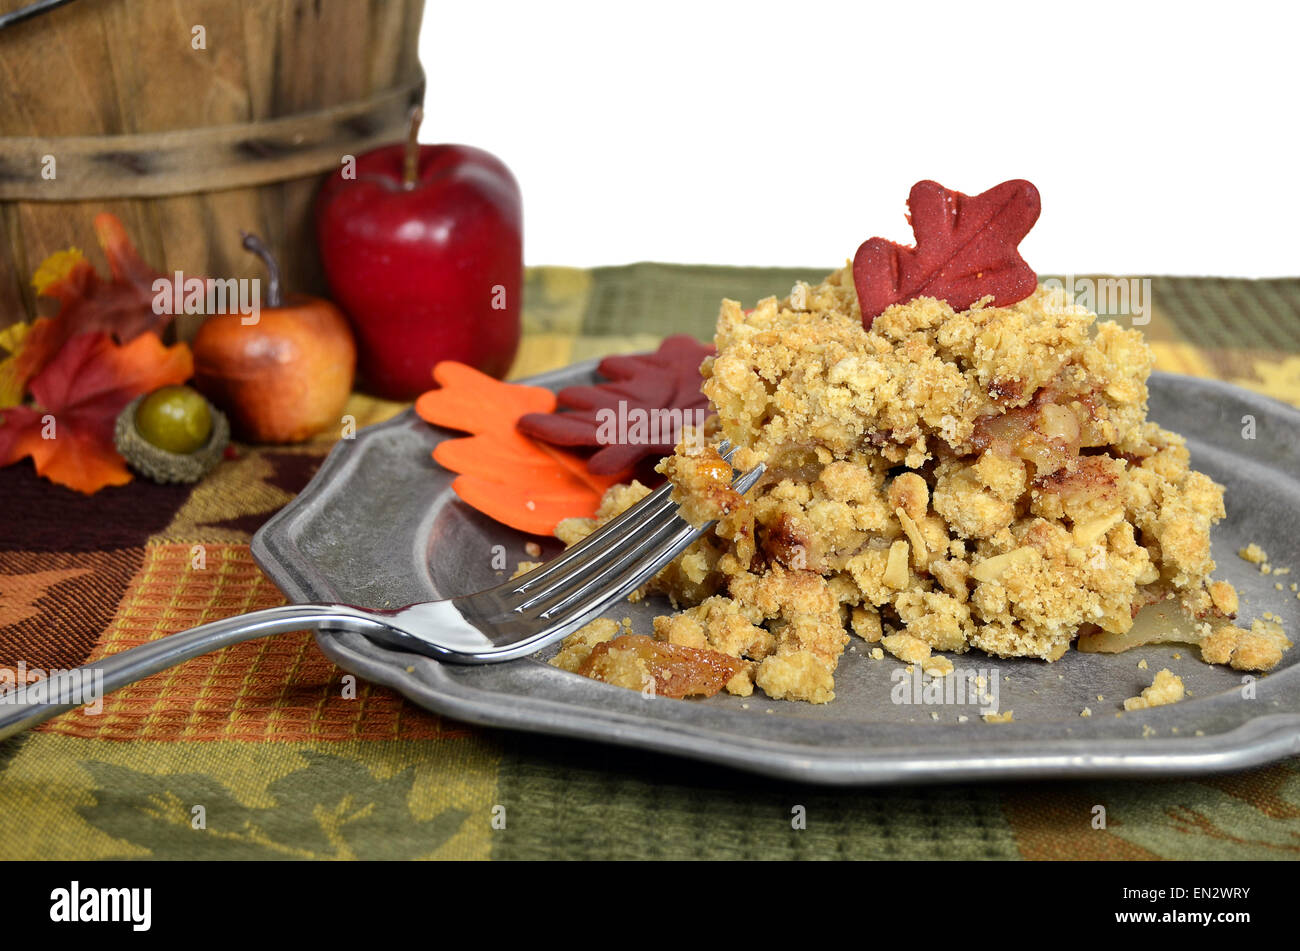 Apple crisp dessert with apples, acorn and fall leaves. Stock Photo